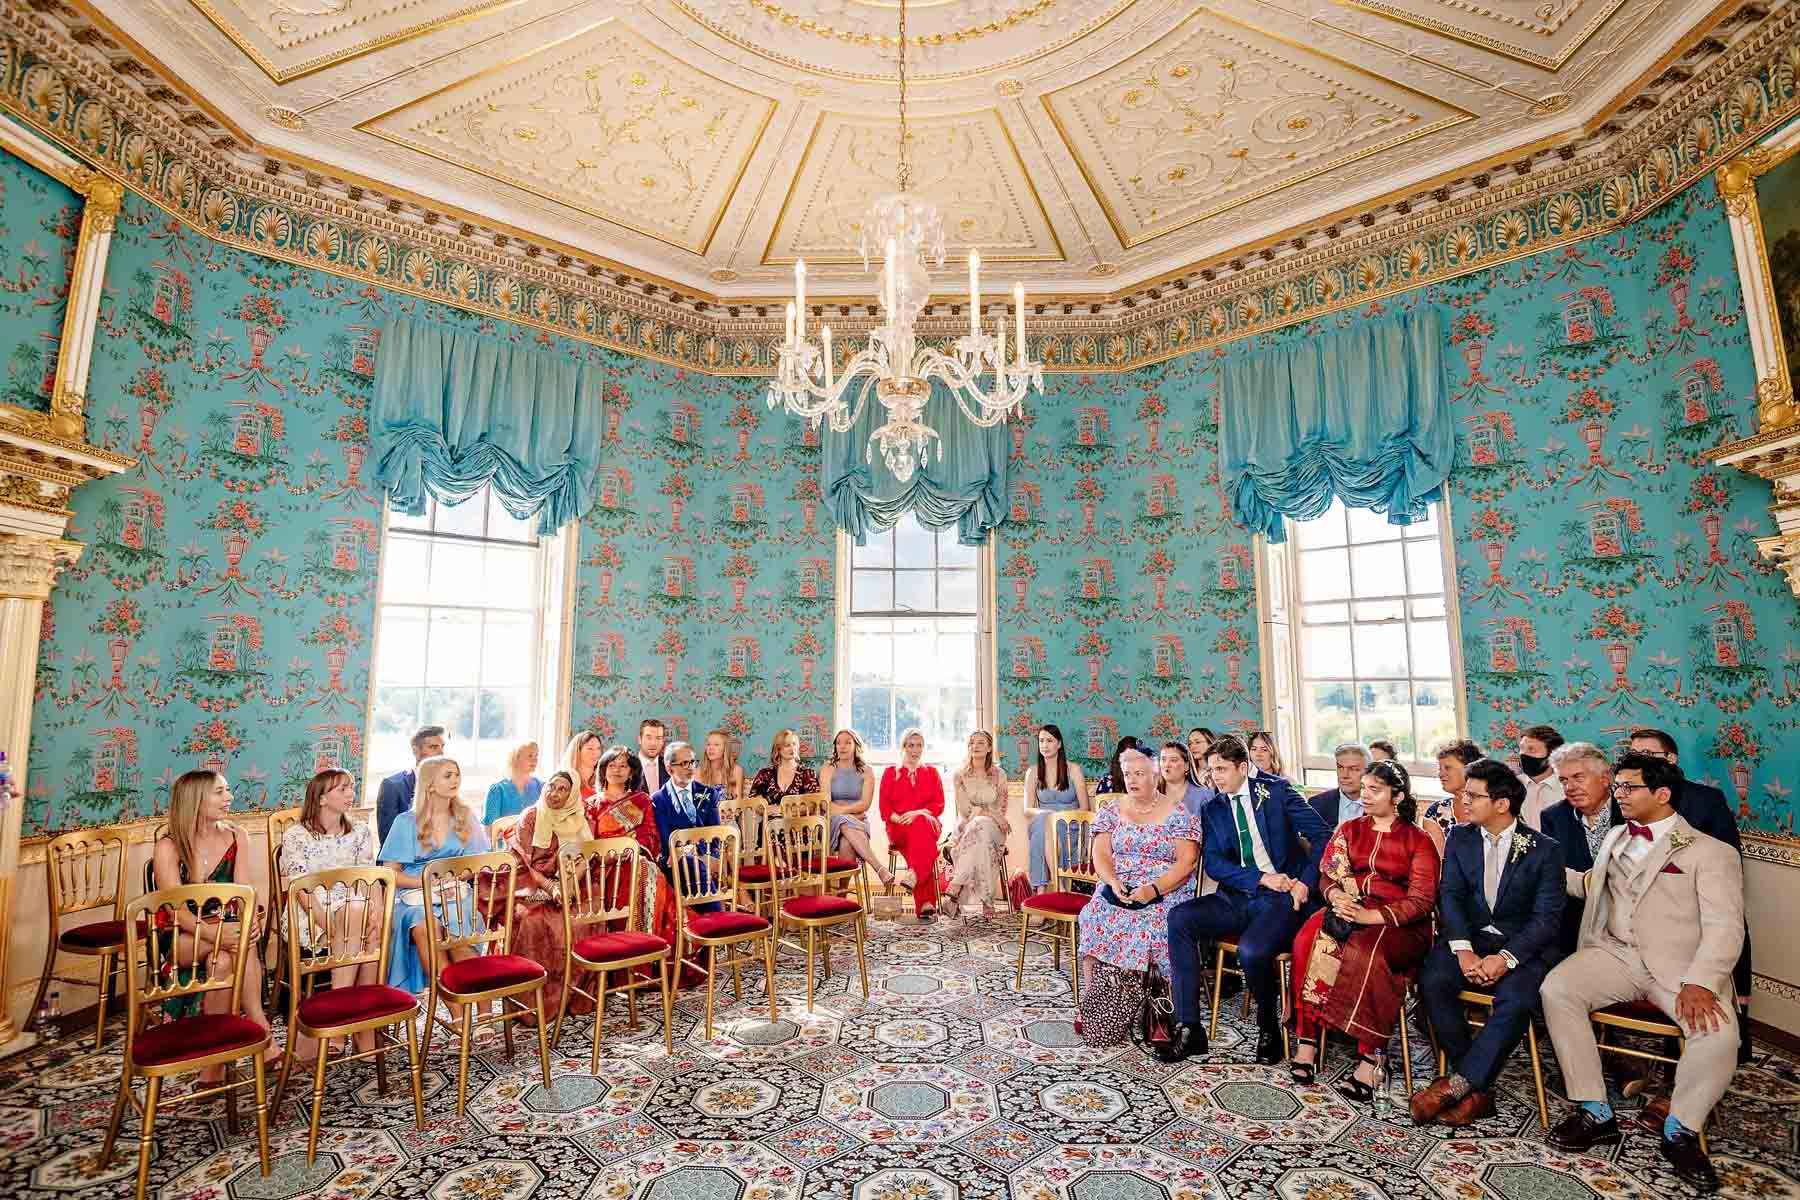 Guests and groom waiting in Danson House's Salon before the wedding ceremony